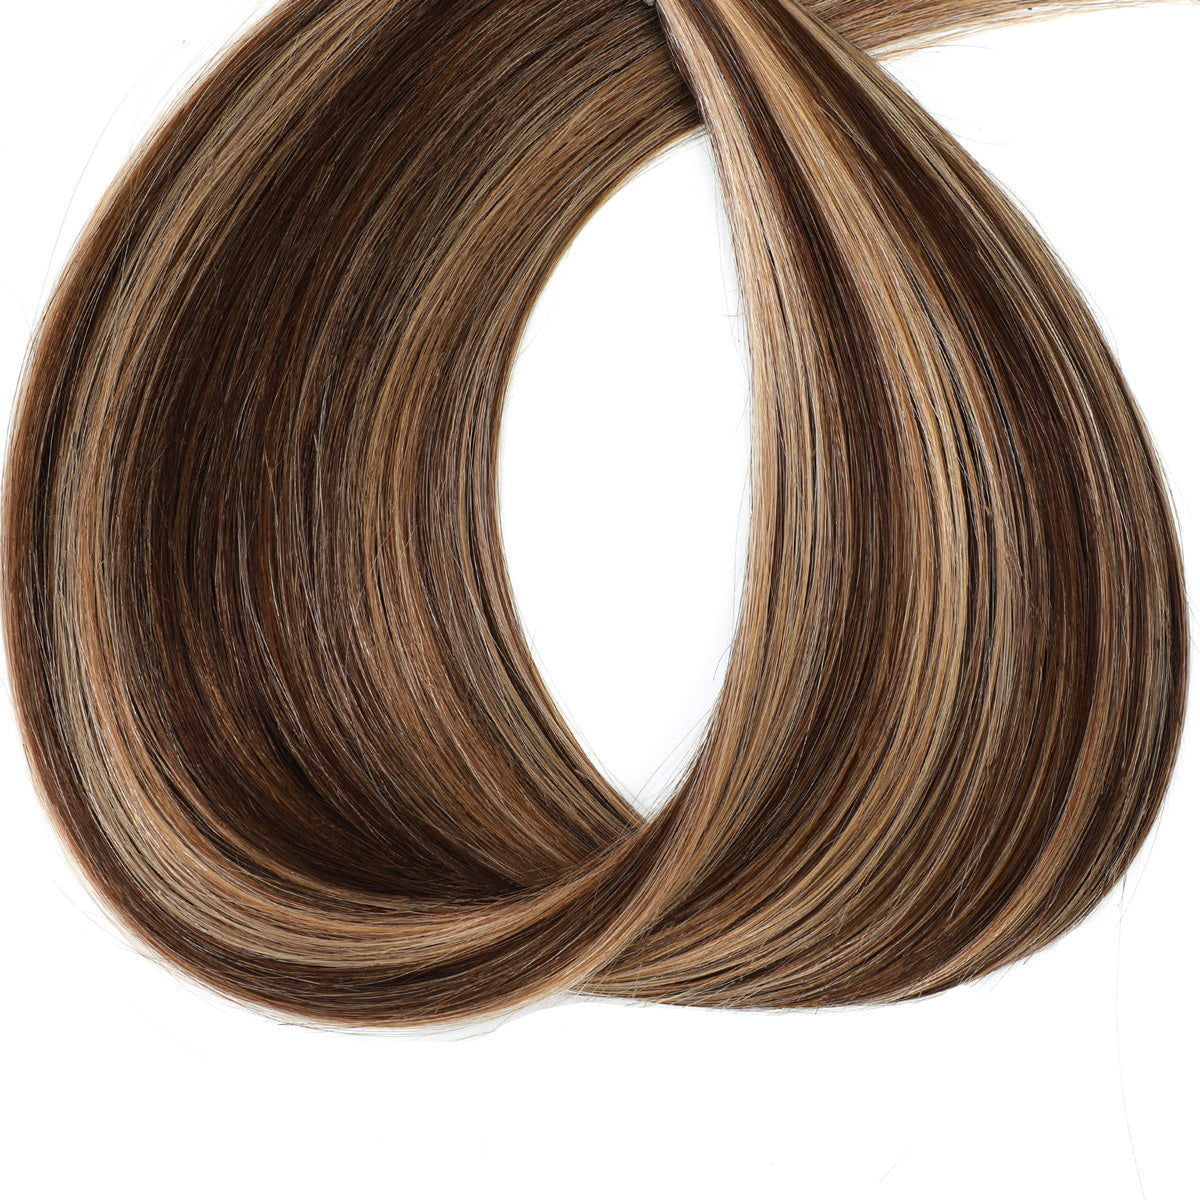 Hair Wefts that blend into your own hair, whether you have thick or fine hair. 